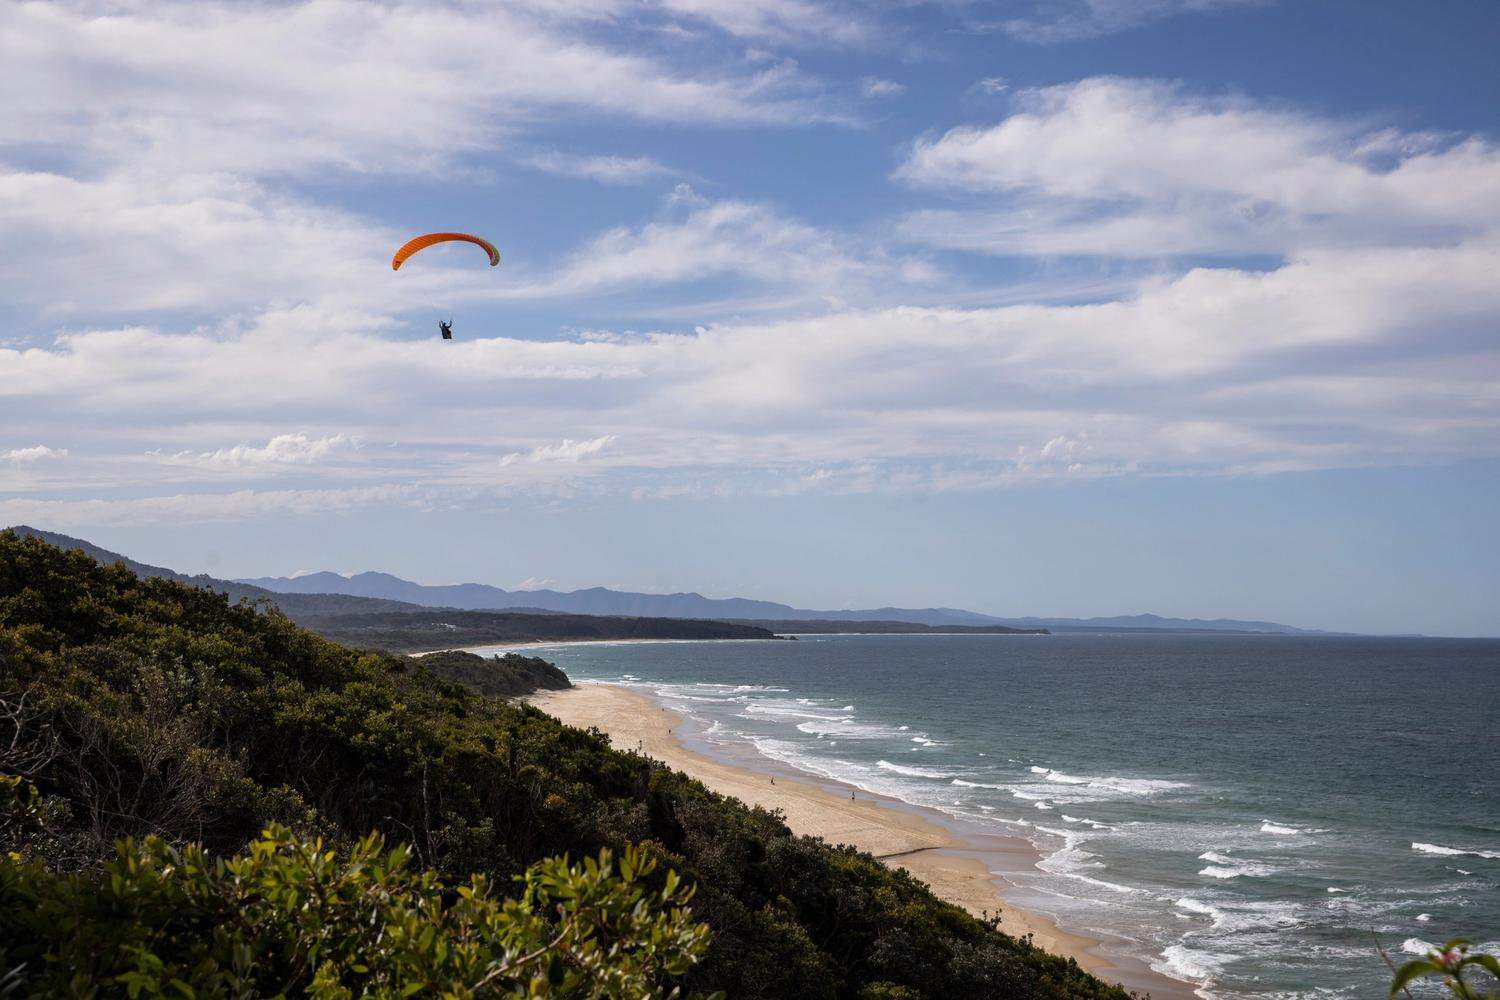 Paragliding in Nambucca Heads